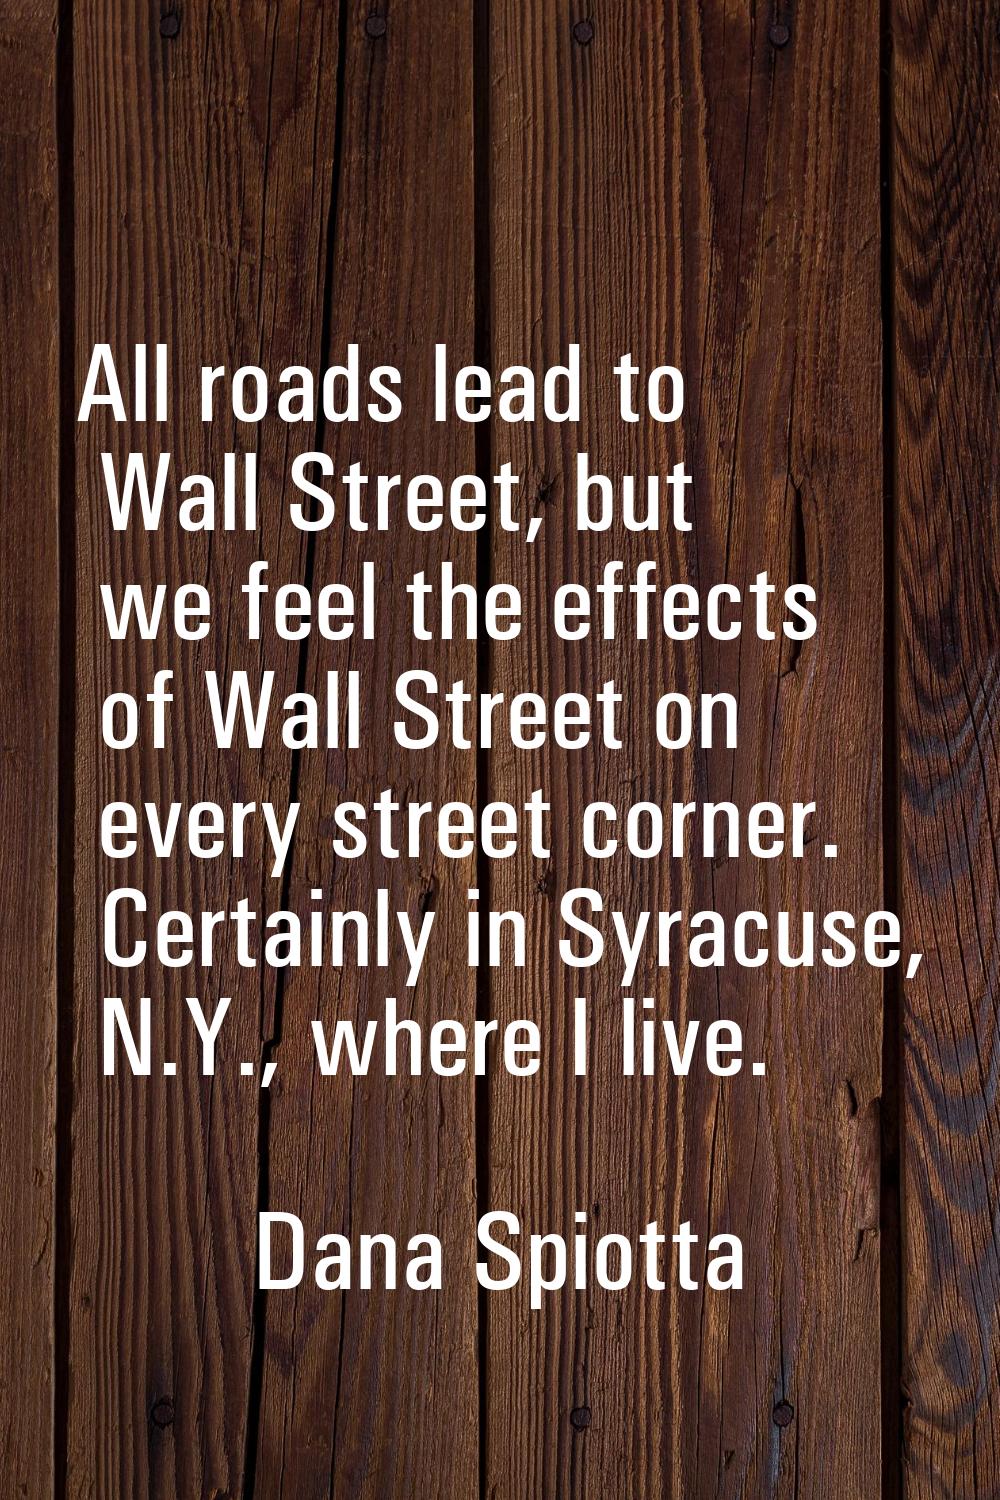 All roads lead to Wall Street, but we feel the effects of Wall Street on every street corner. Certa